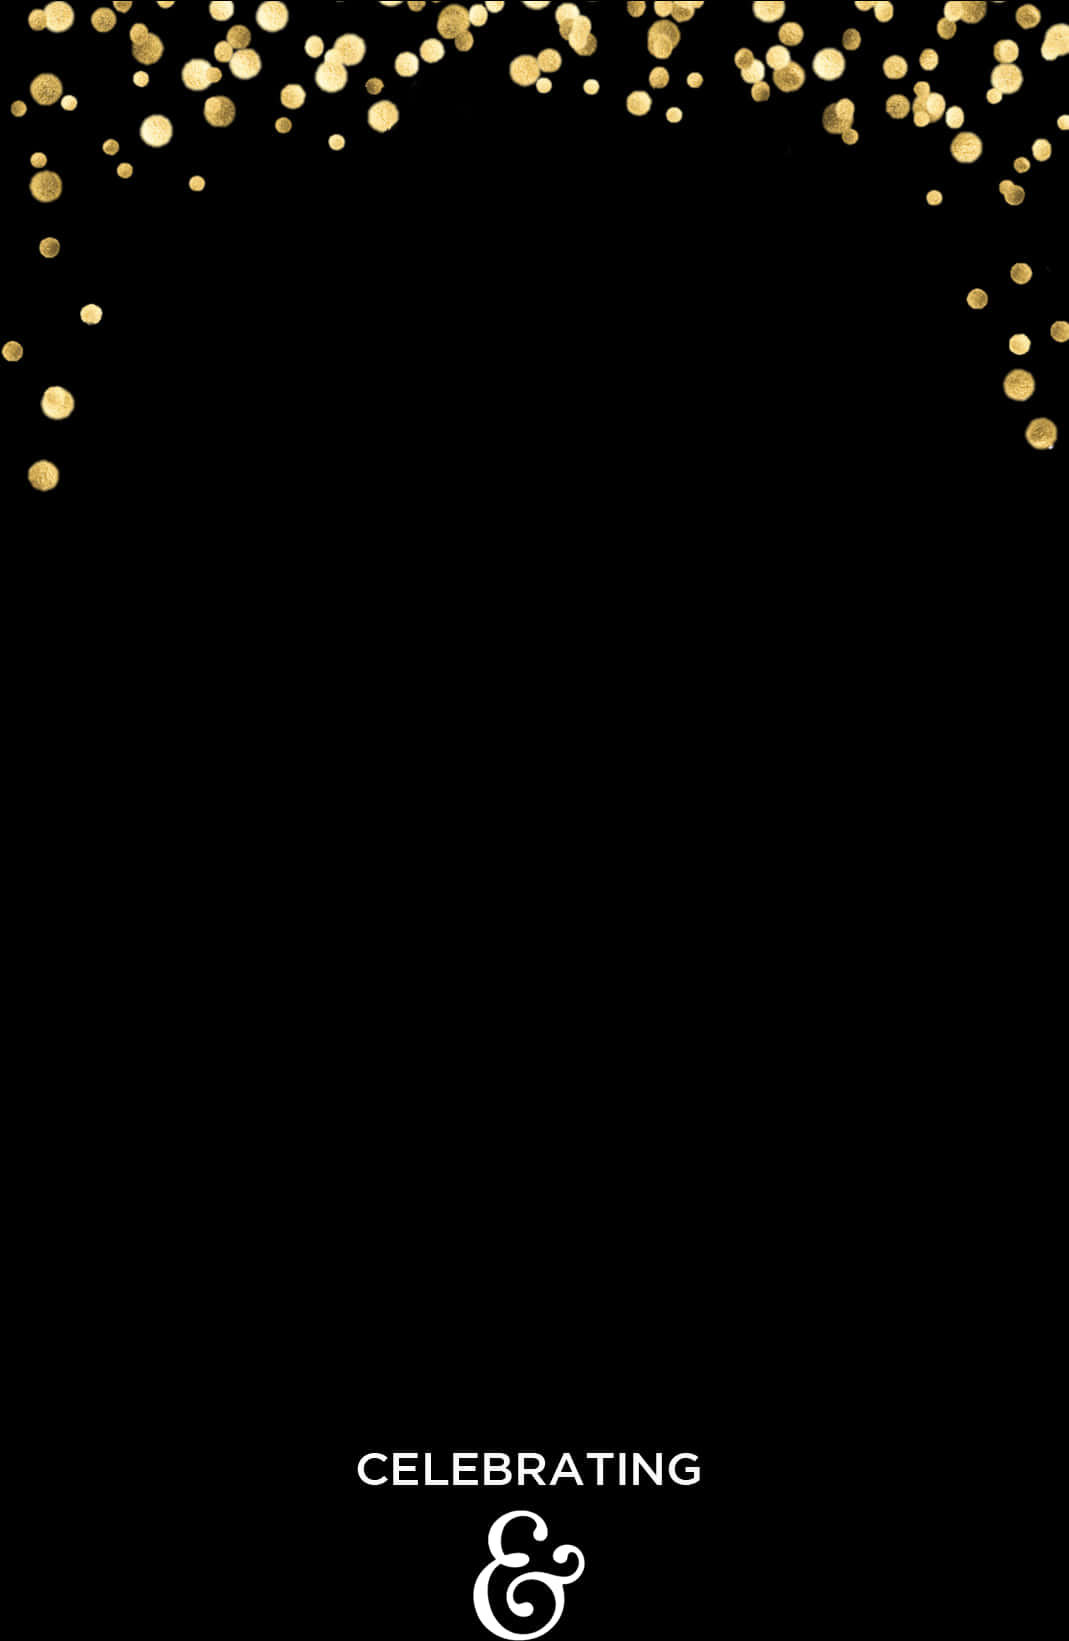 A Black Background With Gold Dots